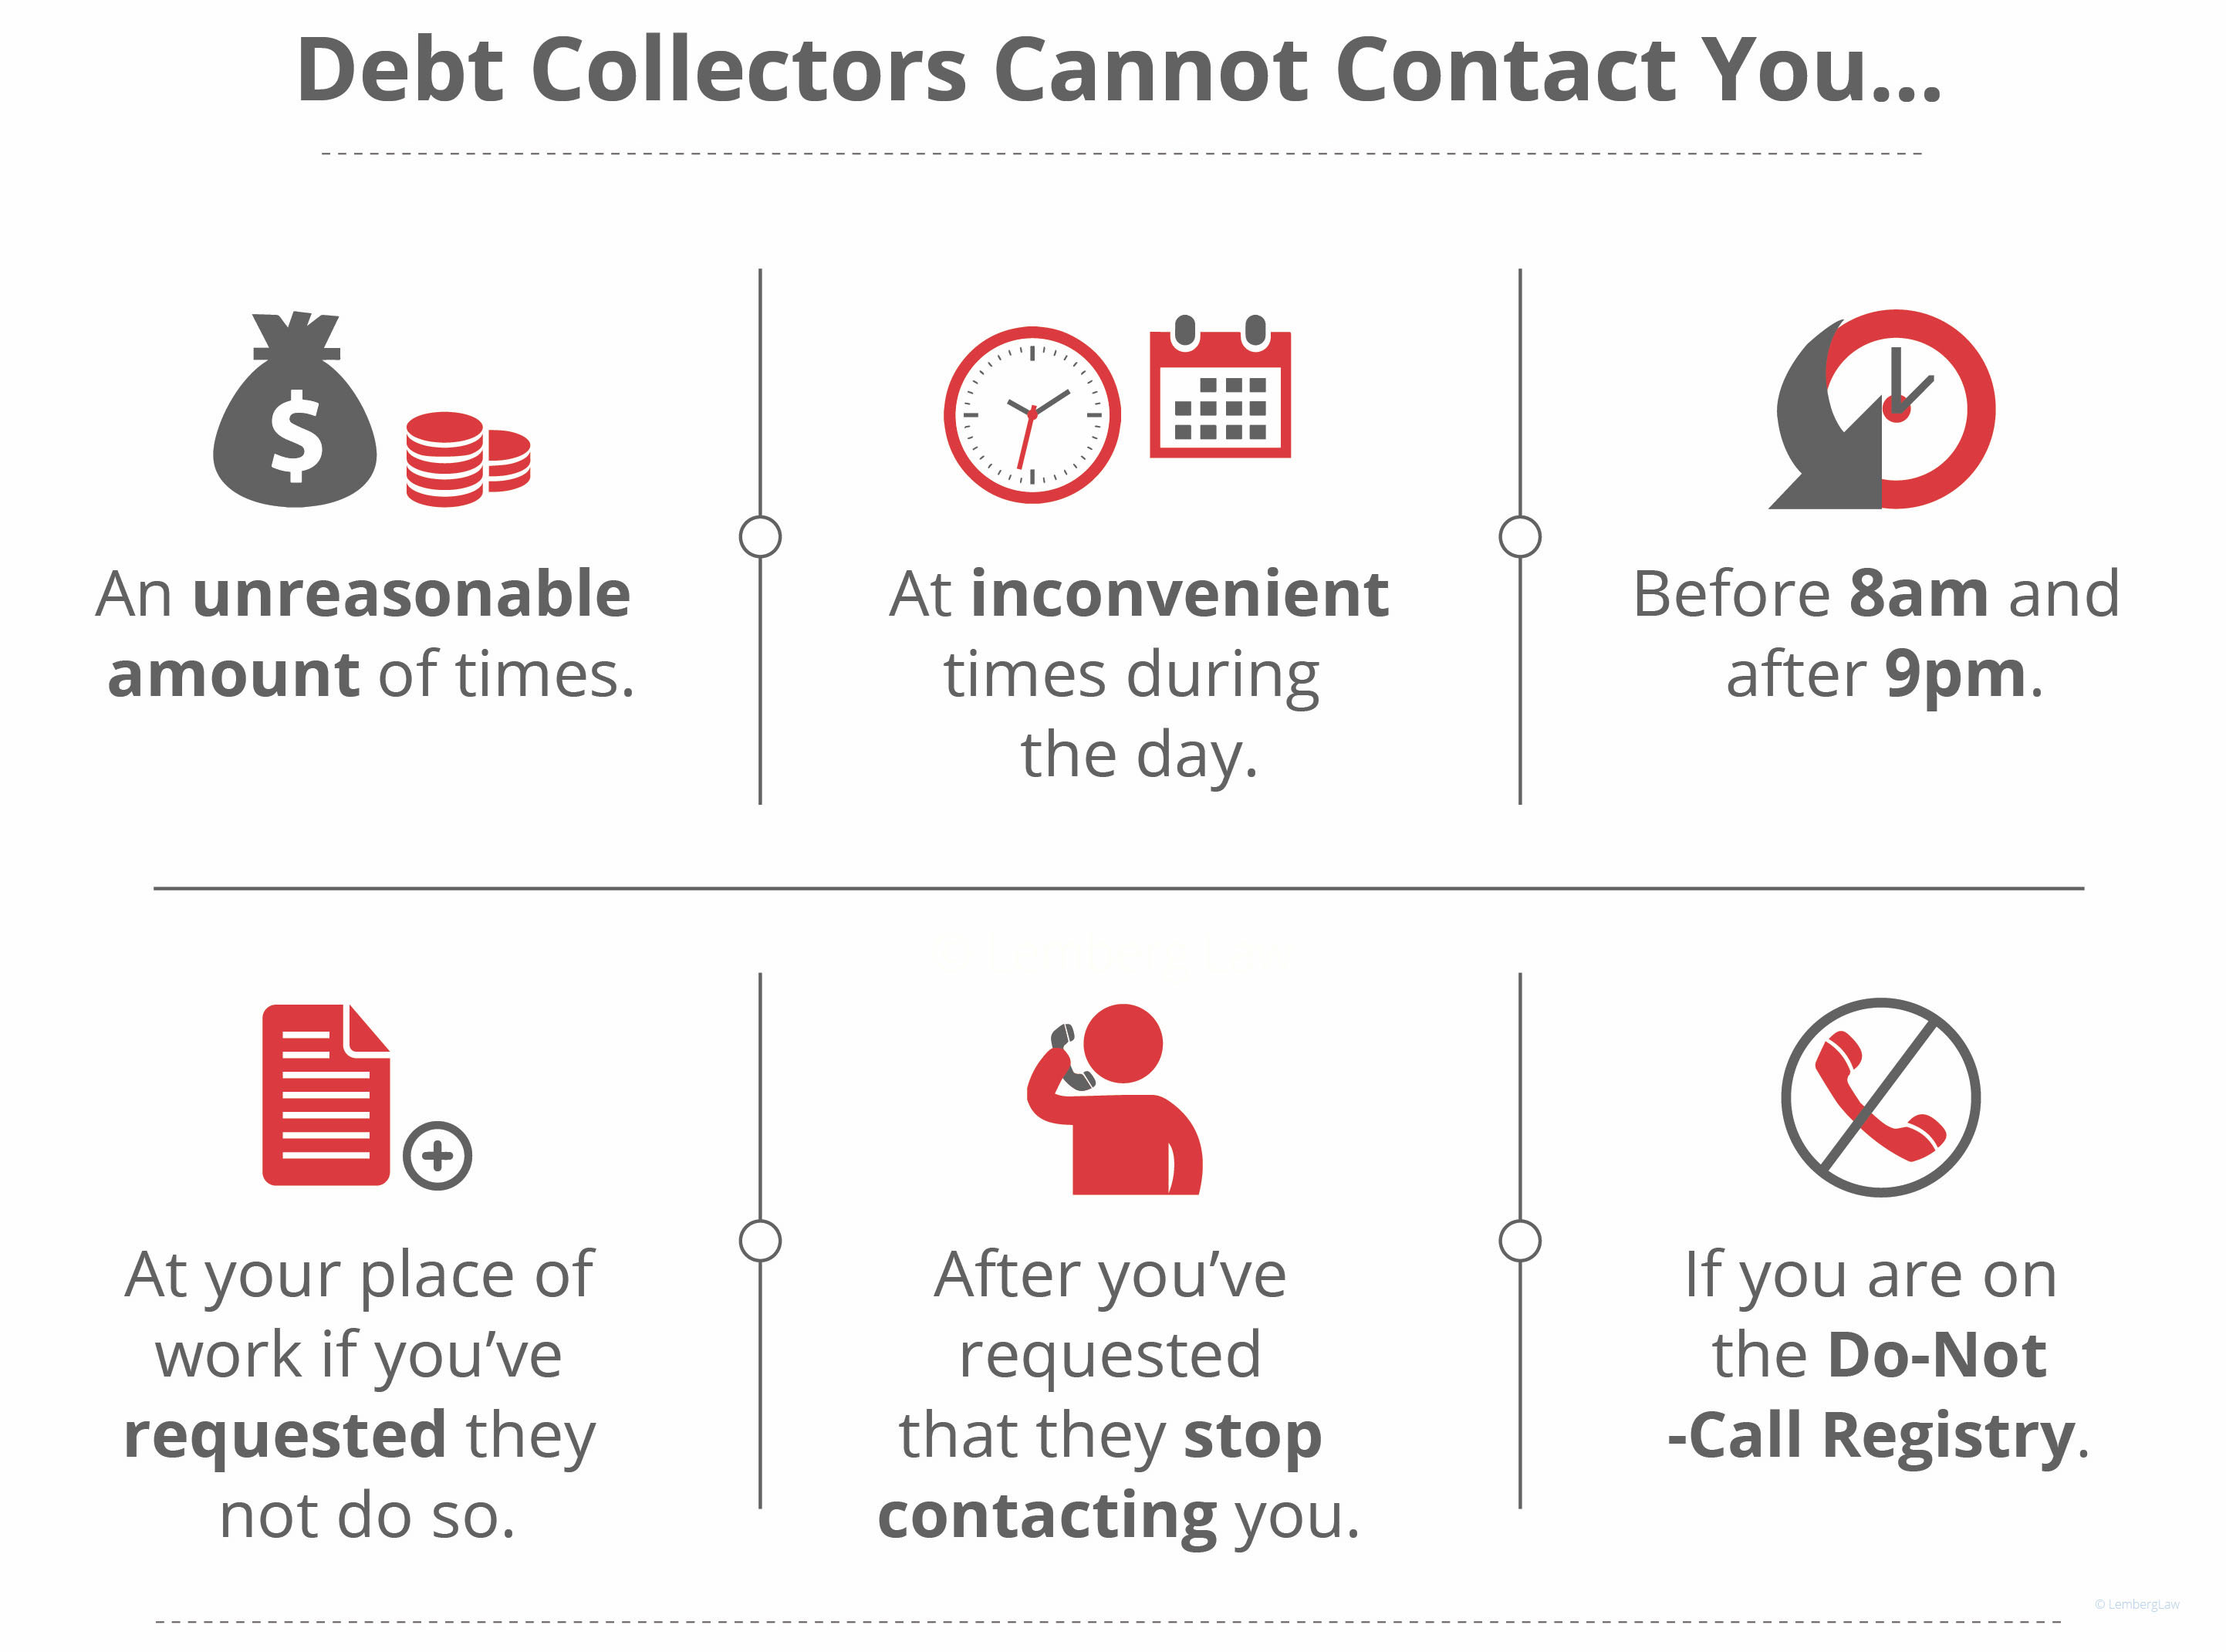 Can Debt Collectors Contact Your Employer?